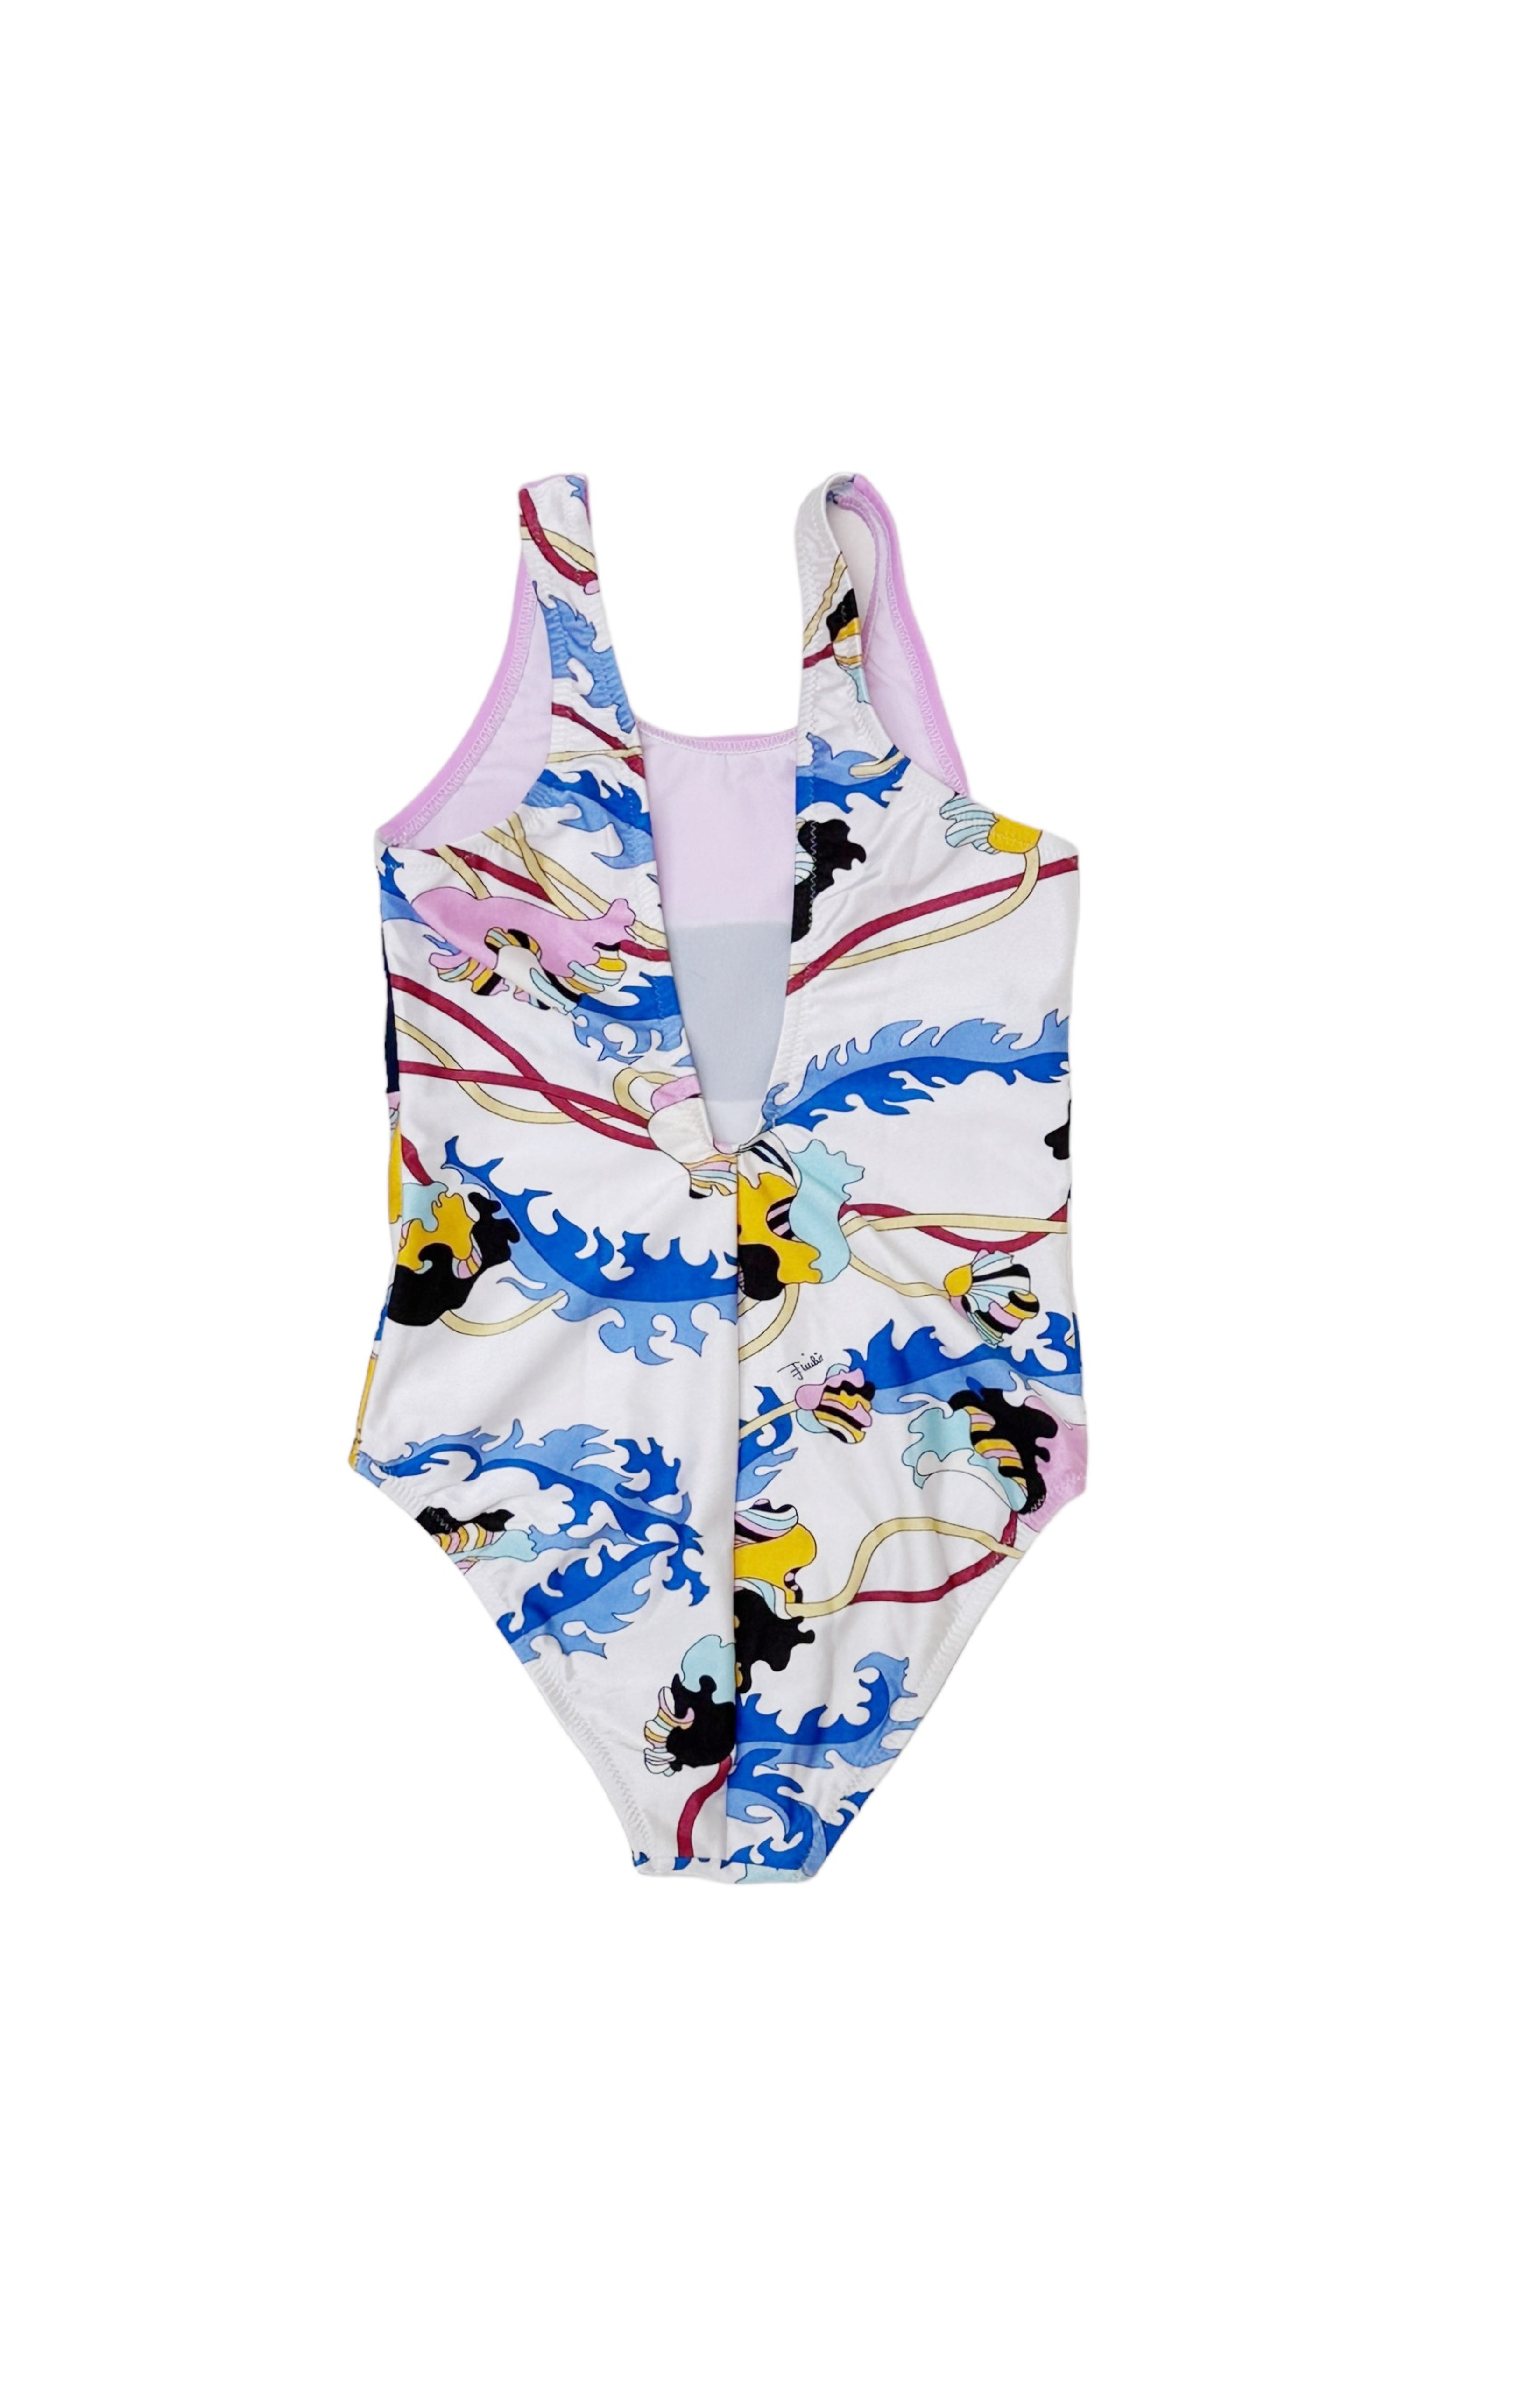 EMILIO PUCCI (RARE) Swimsuit Size: No size tags, fits like 5-6 Years